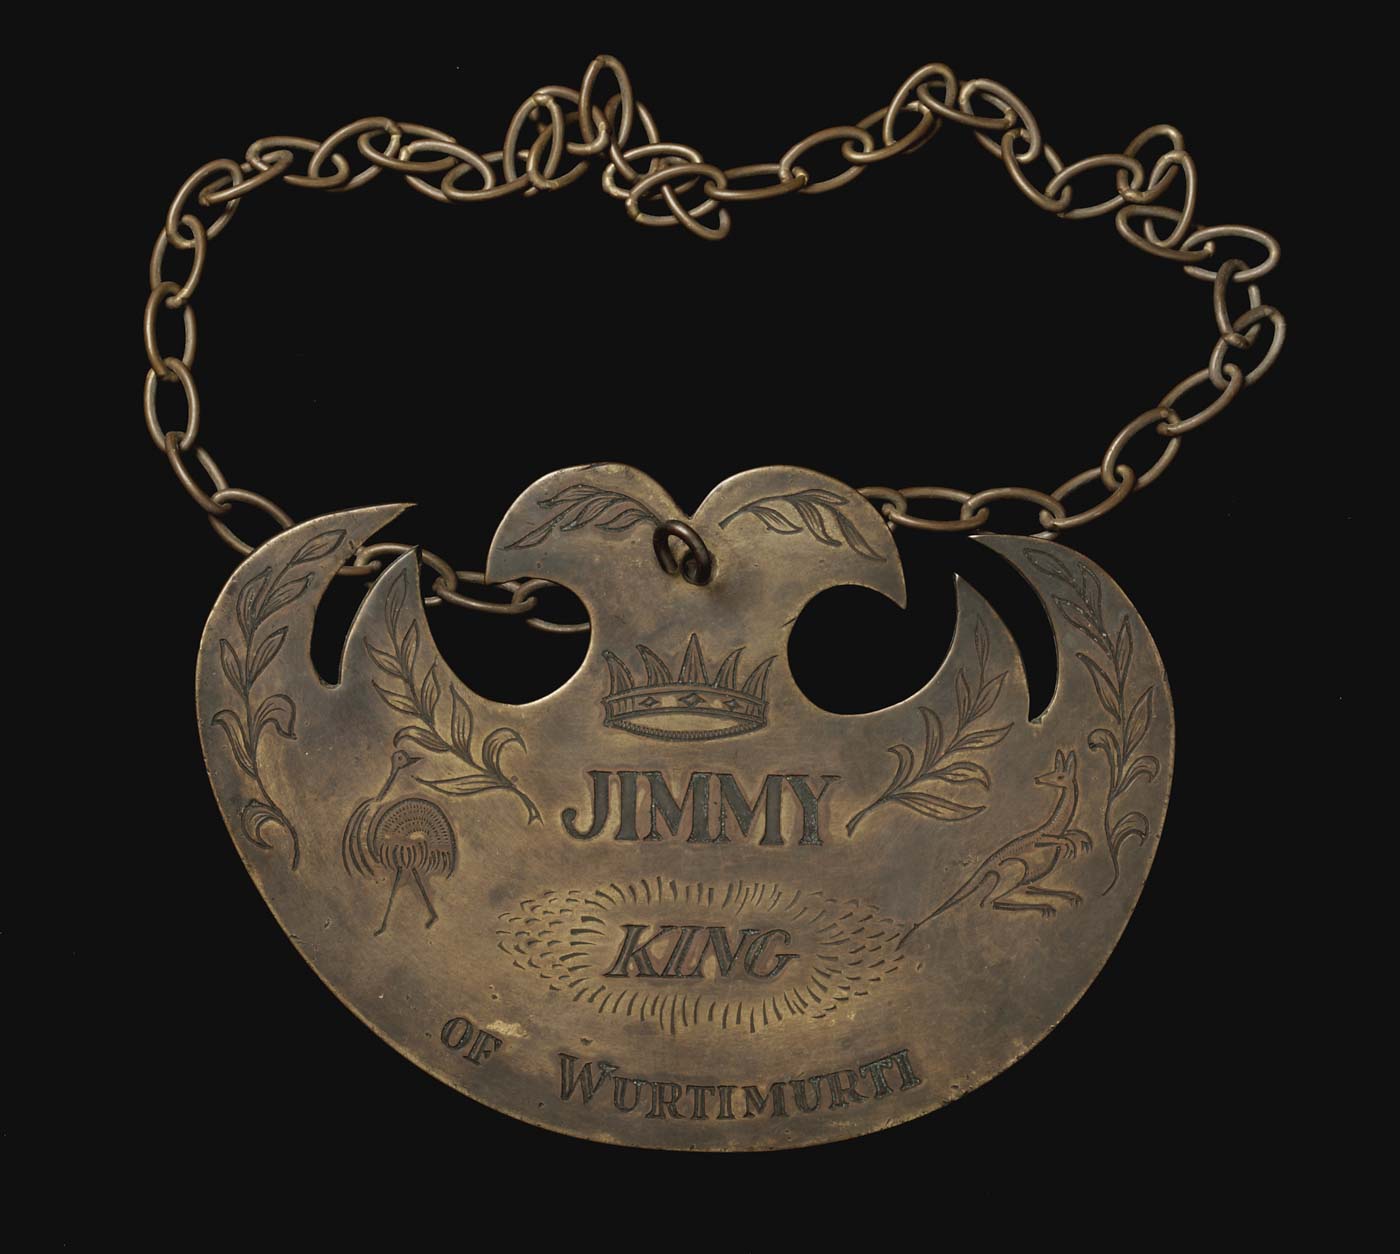 Engraved breastplate with a chain at top and an image of a kangaroo, emu, foliage and a crown. - click to view larger image